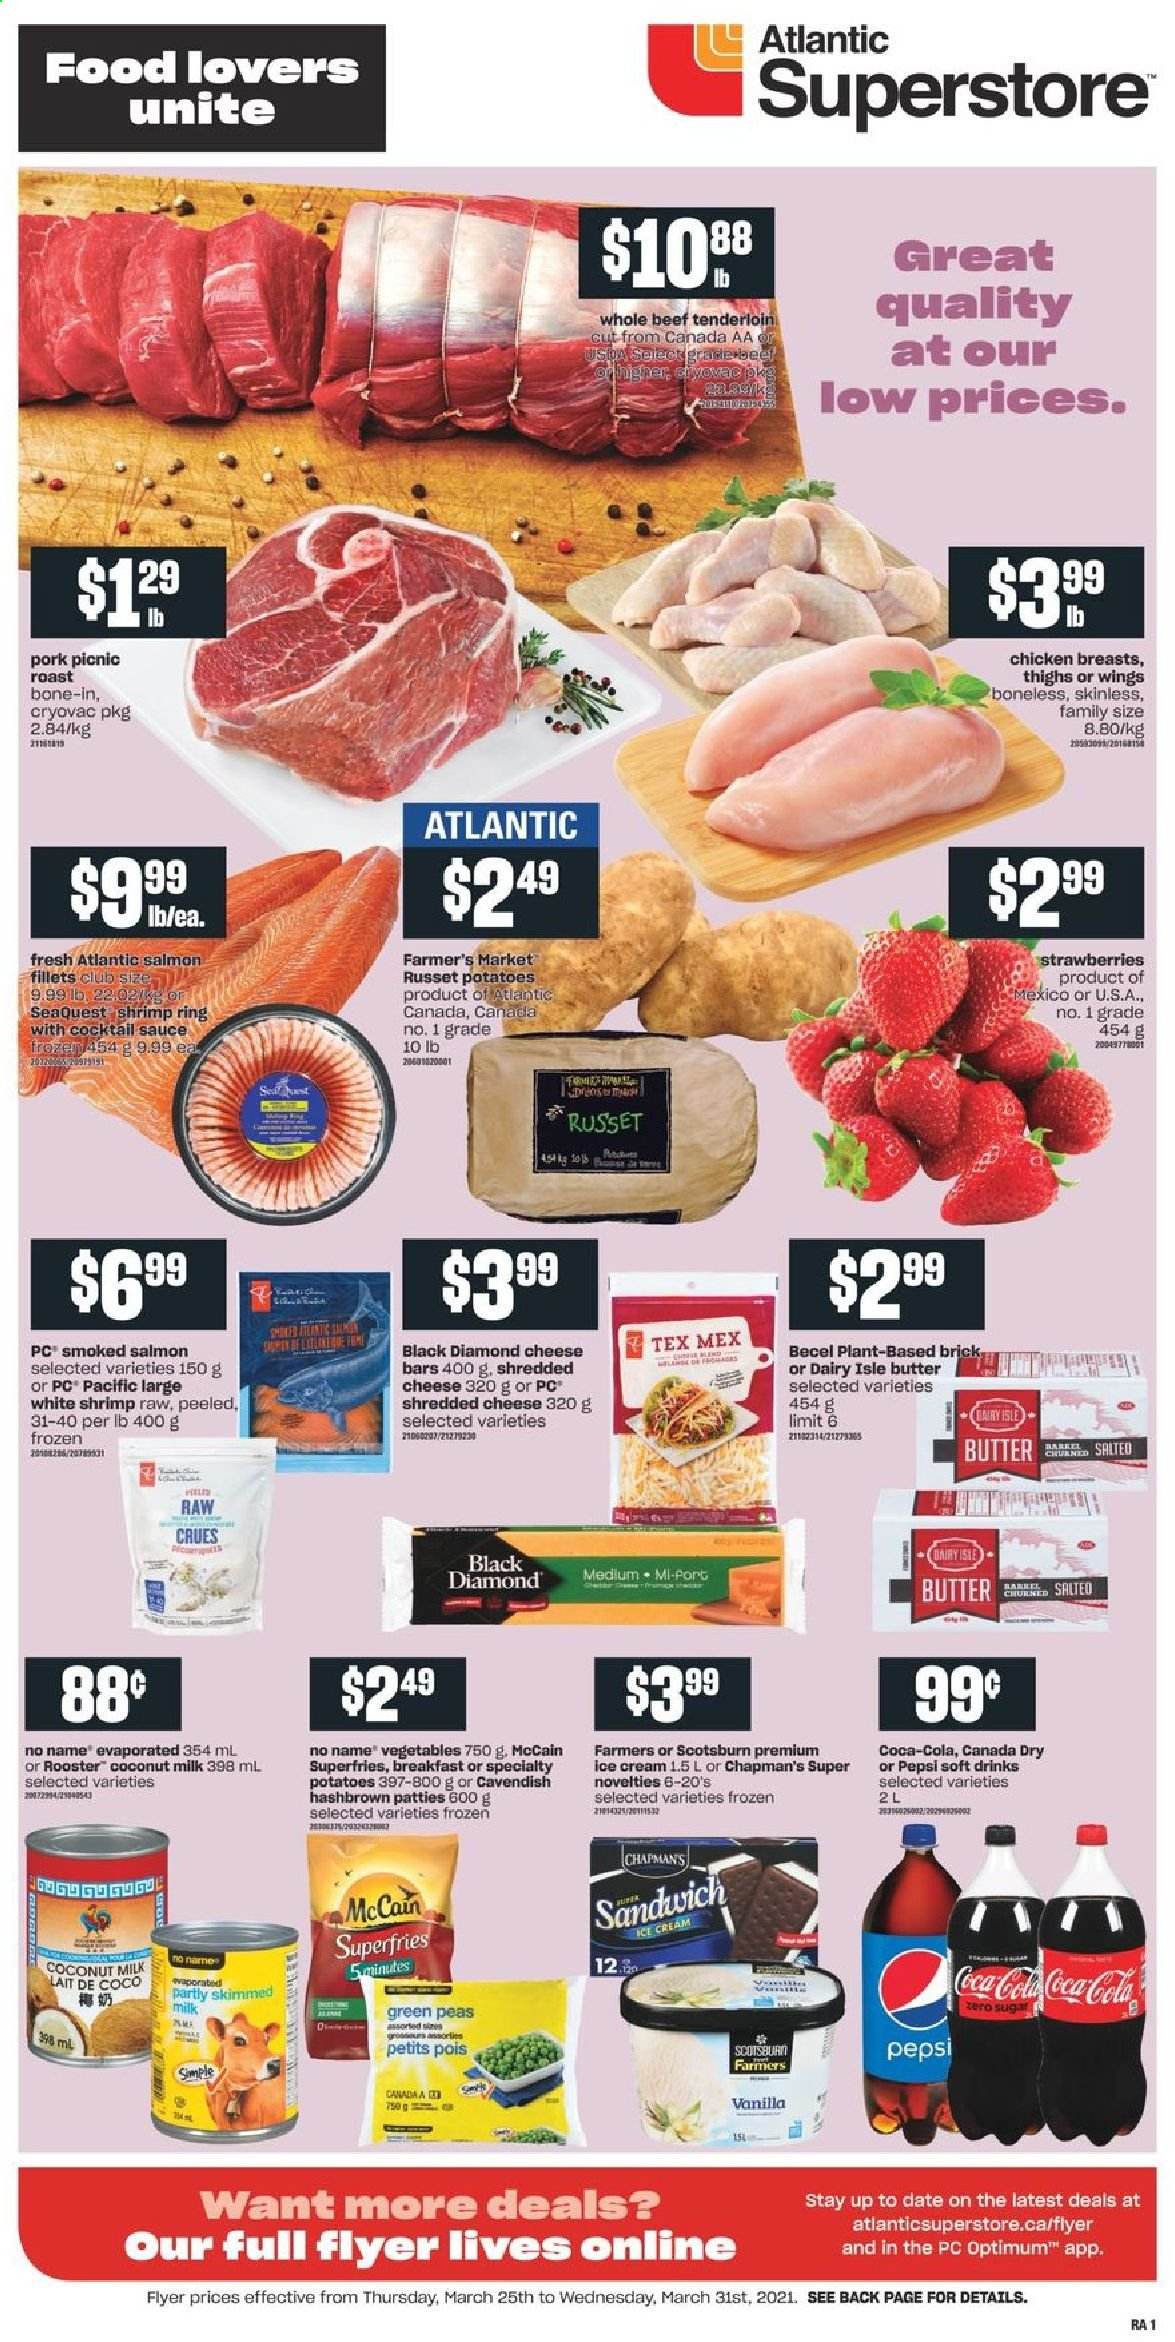 thumbnail - Atlantic Superstore Flyer - March 25, 2021 - March 31, 2021 - Sales products - russet potatoes, potatoes, peas, salmon, salmon fillet, smoked salmon, shrimps, No Name, sauce, shredded cheese, butter, ice cream, McCain, potato fries, coconut milk, cocktail sauce, Canada Dry, Coca-Cola, Pepsi, soft drink, chicken breasts, beef meat, beef tenderloin, Optimum. Page 1.